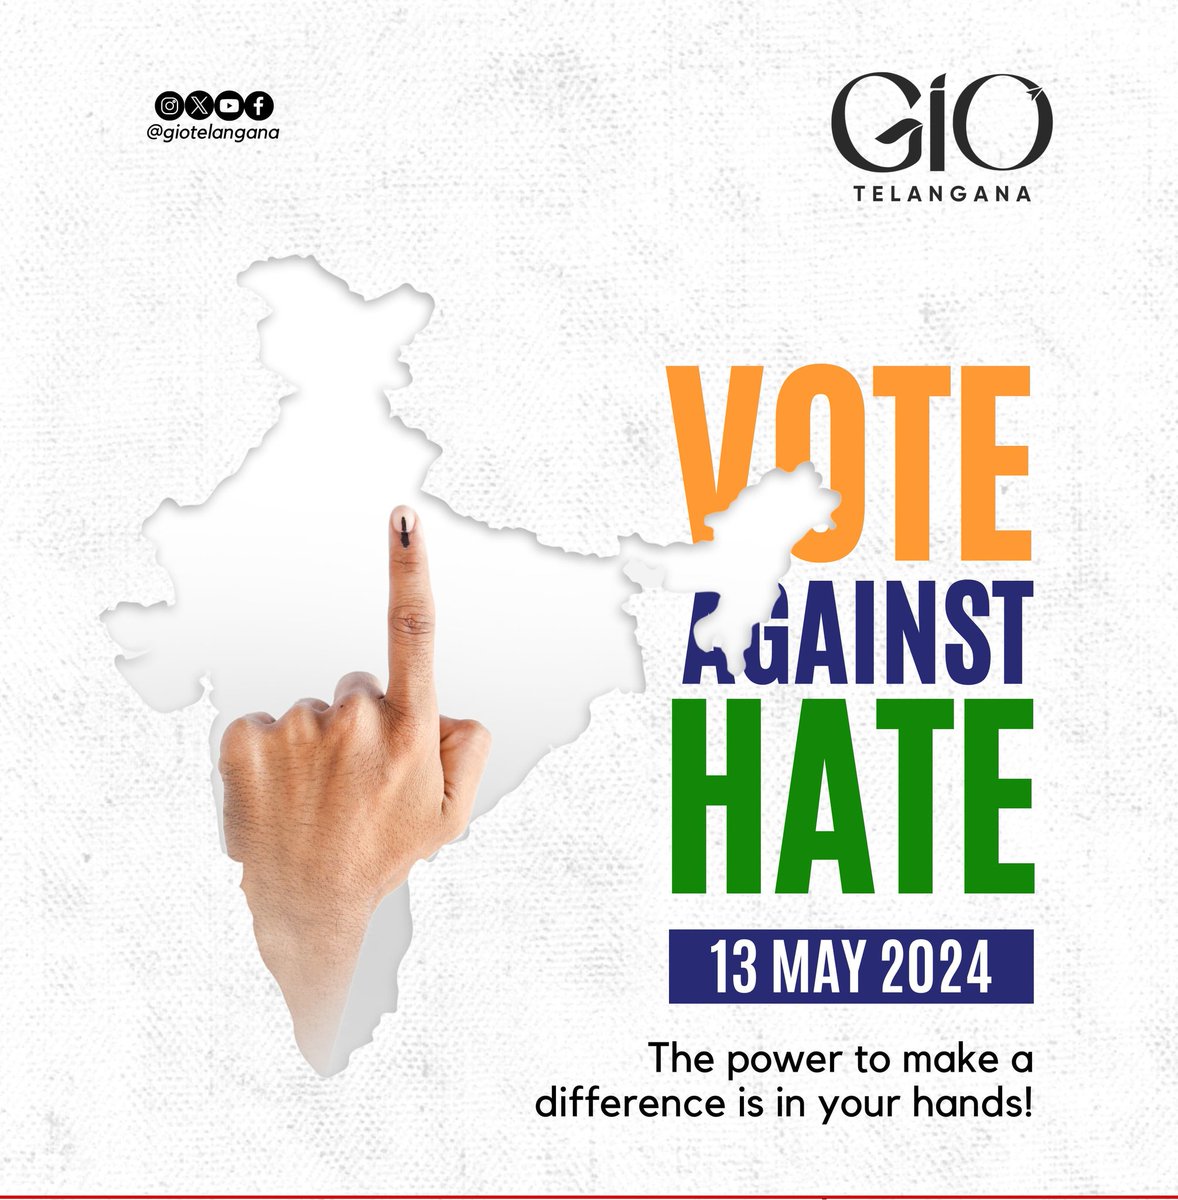 Vote Against Hate 🇮🇳 
13 May 2024 | Use Your Vote

#GoVote #LokSabhaElection2024 
#Elections2024 #Telangana